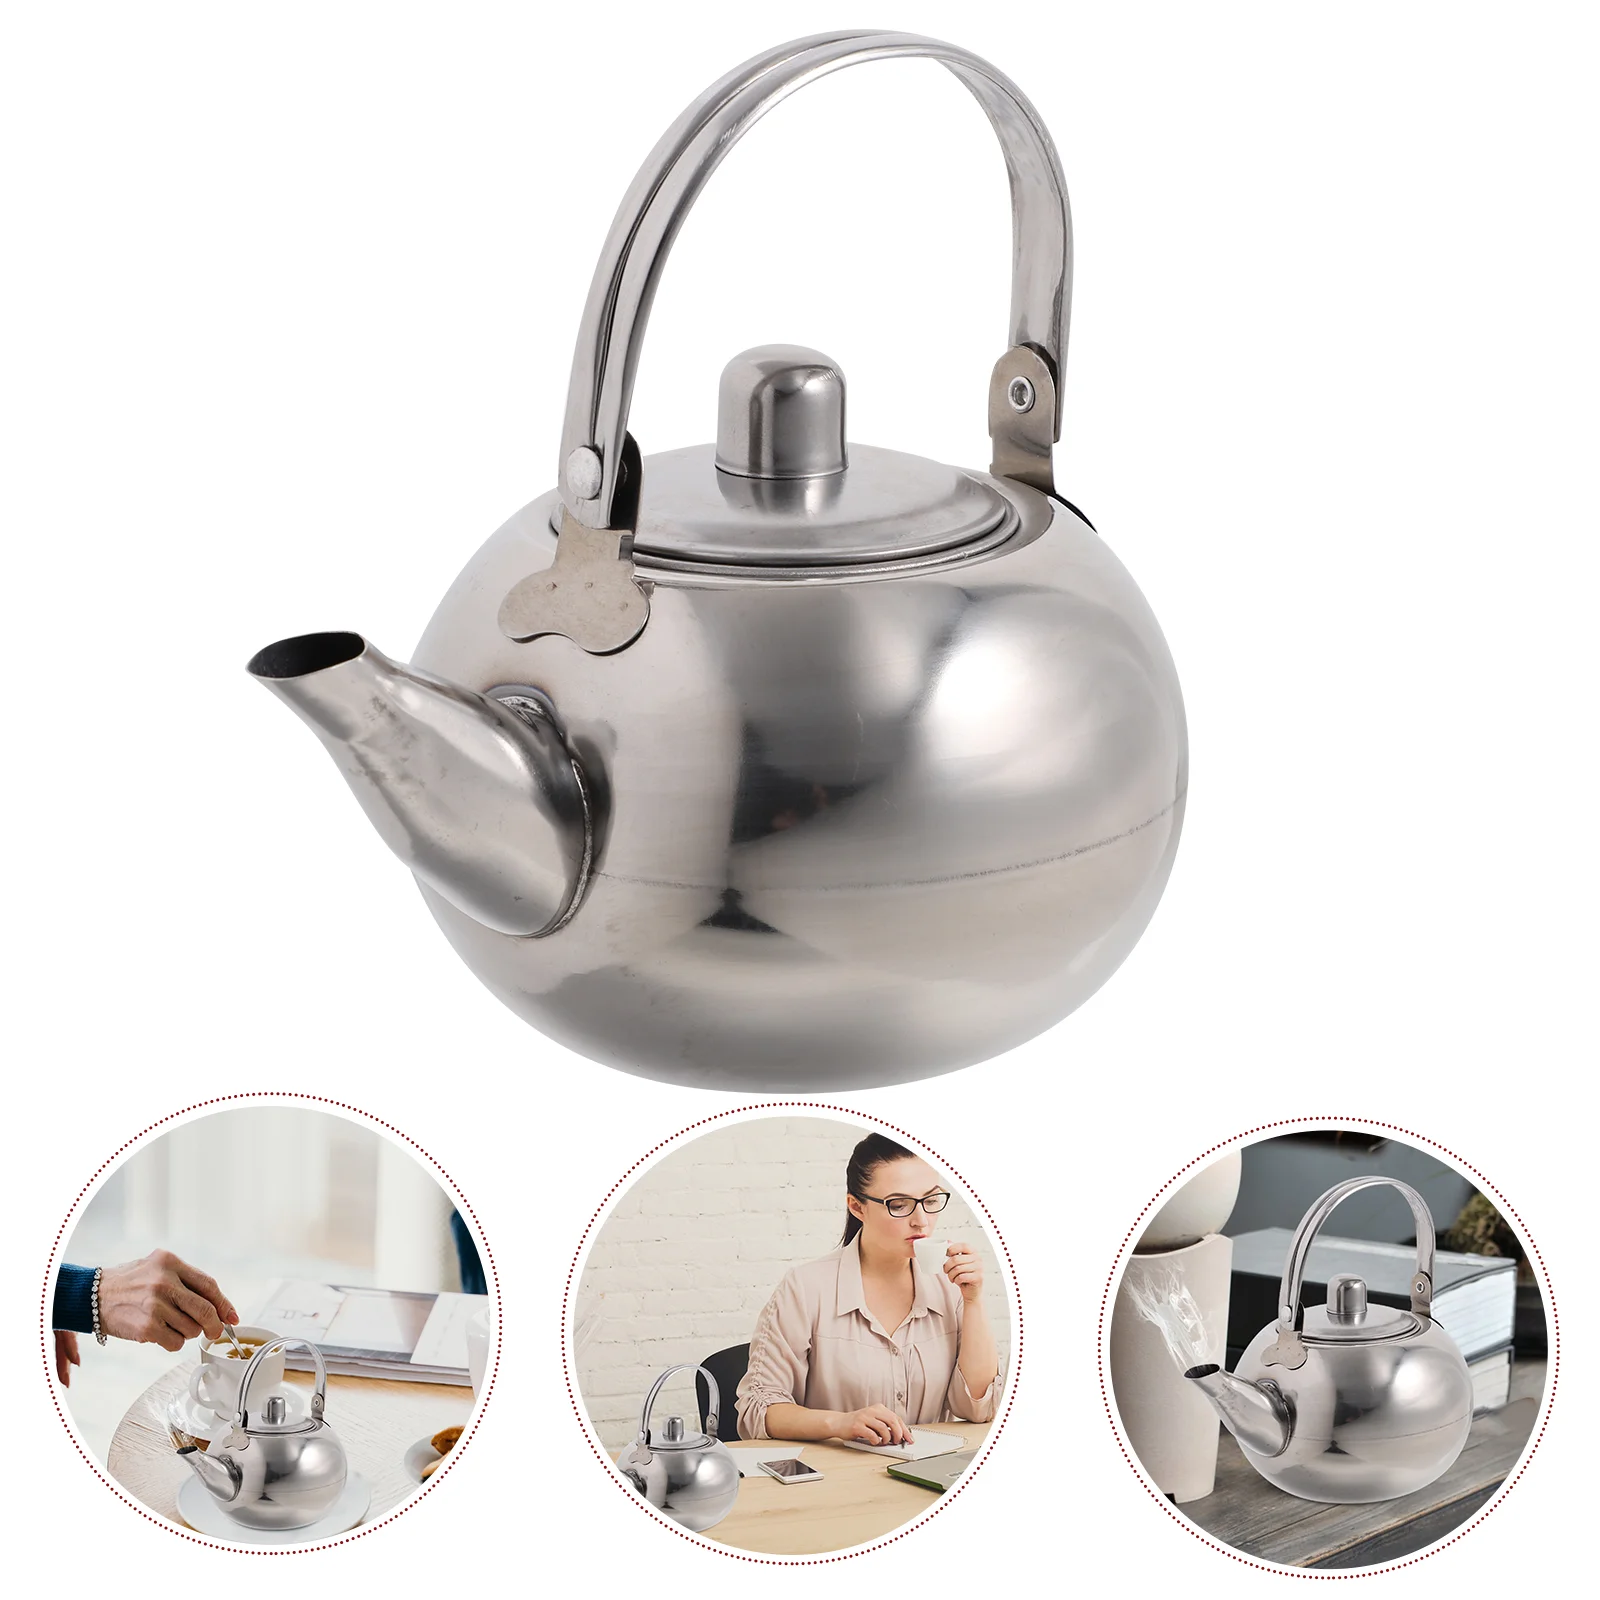 

Kettle Tea Water Stovetop Teapot Whistling Pot Steel Stainless Stove Boiling Coffee Hot Gas Kettles Teakettle Heating Metal